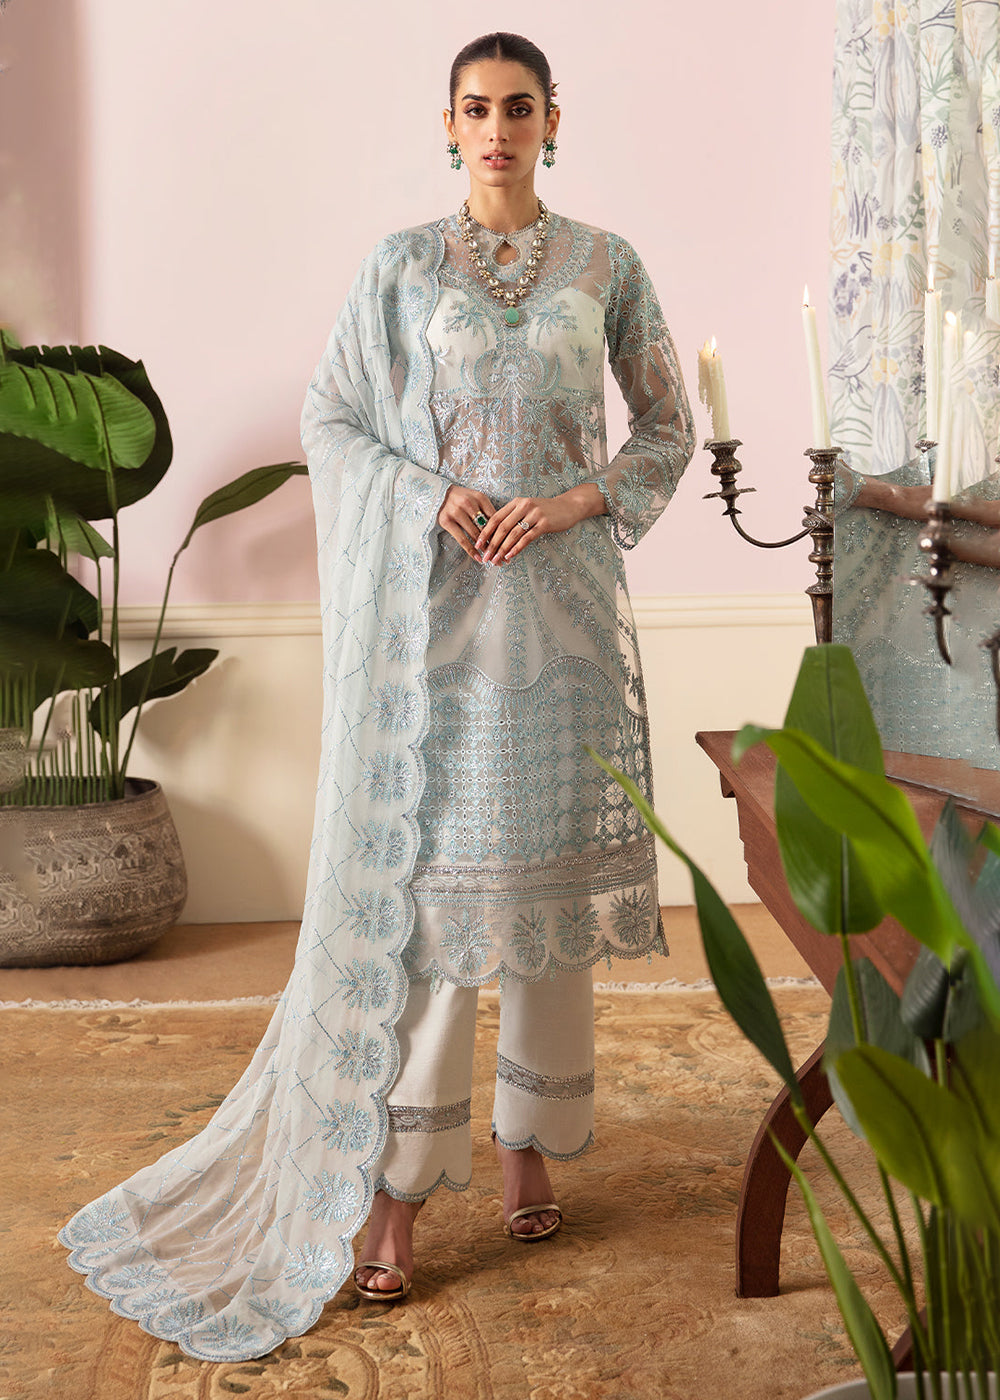 Buy Now The Whispers of Grandeur Luxury Formals '24 by Ayzel | VIANA Online at Empress Online in USA, UK, Canada & Worldwide at Empress Clothing.